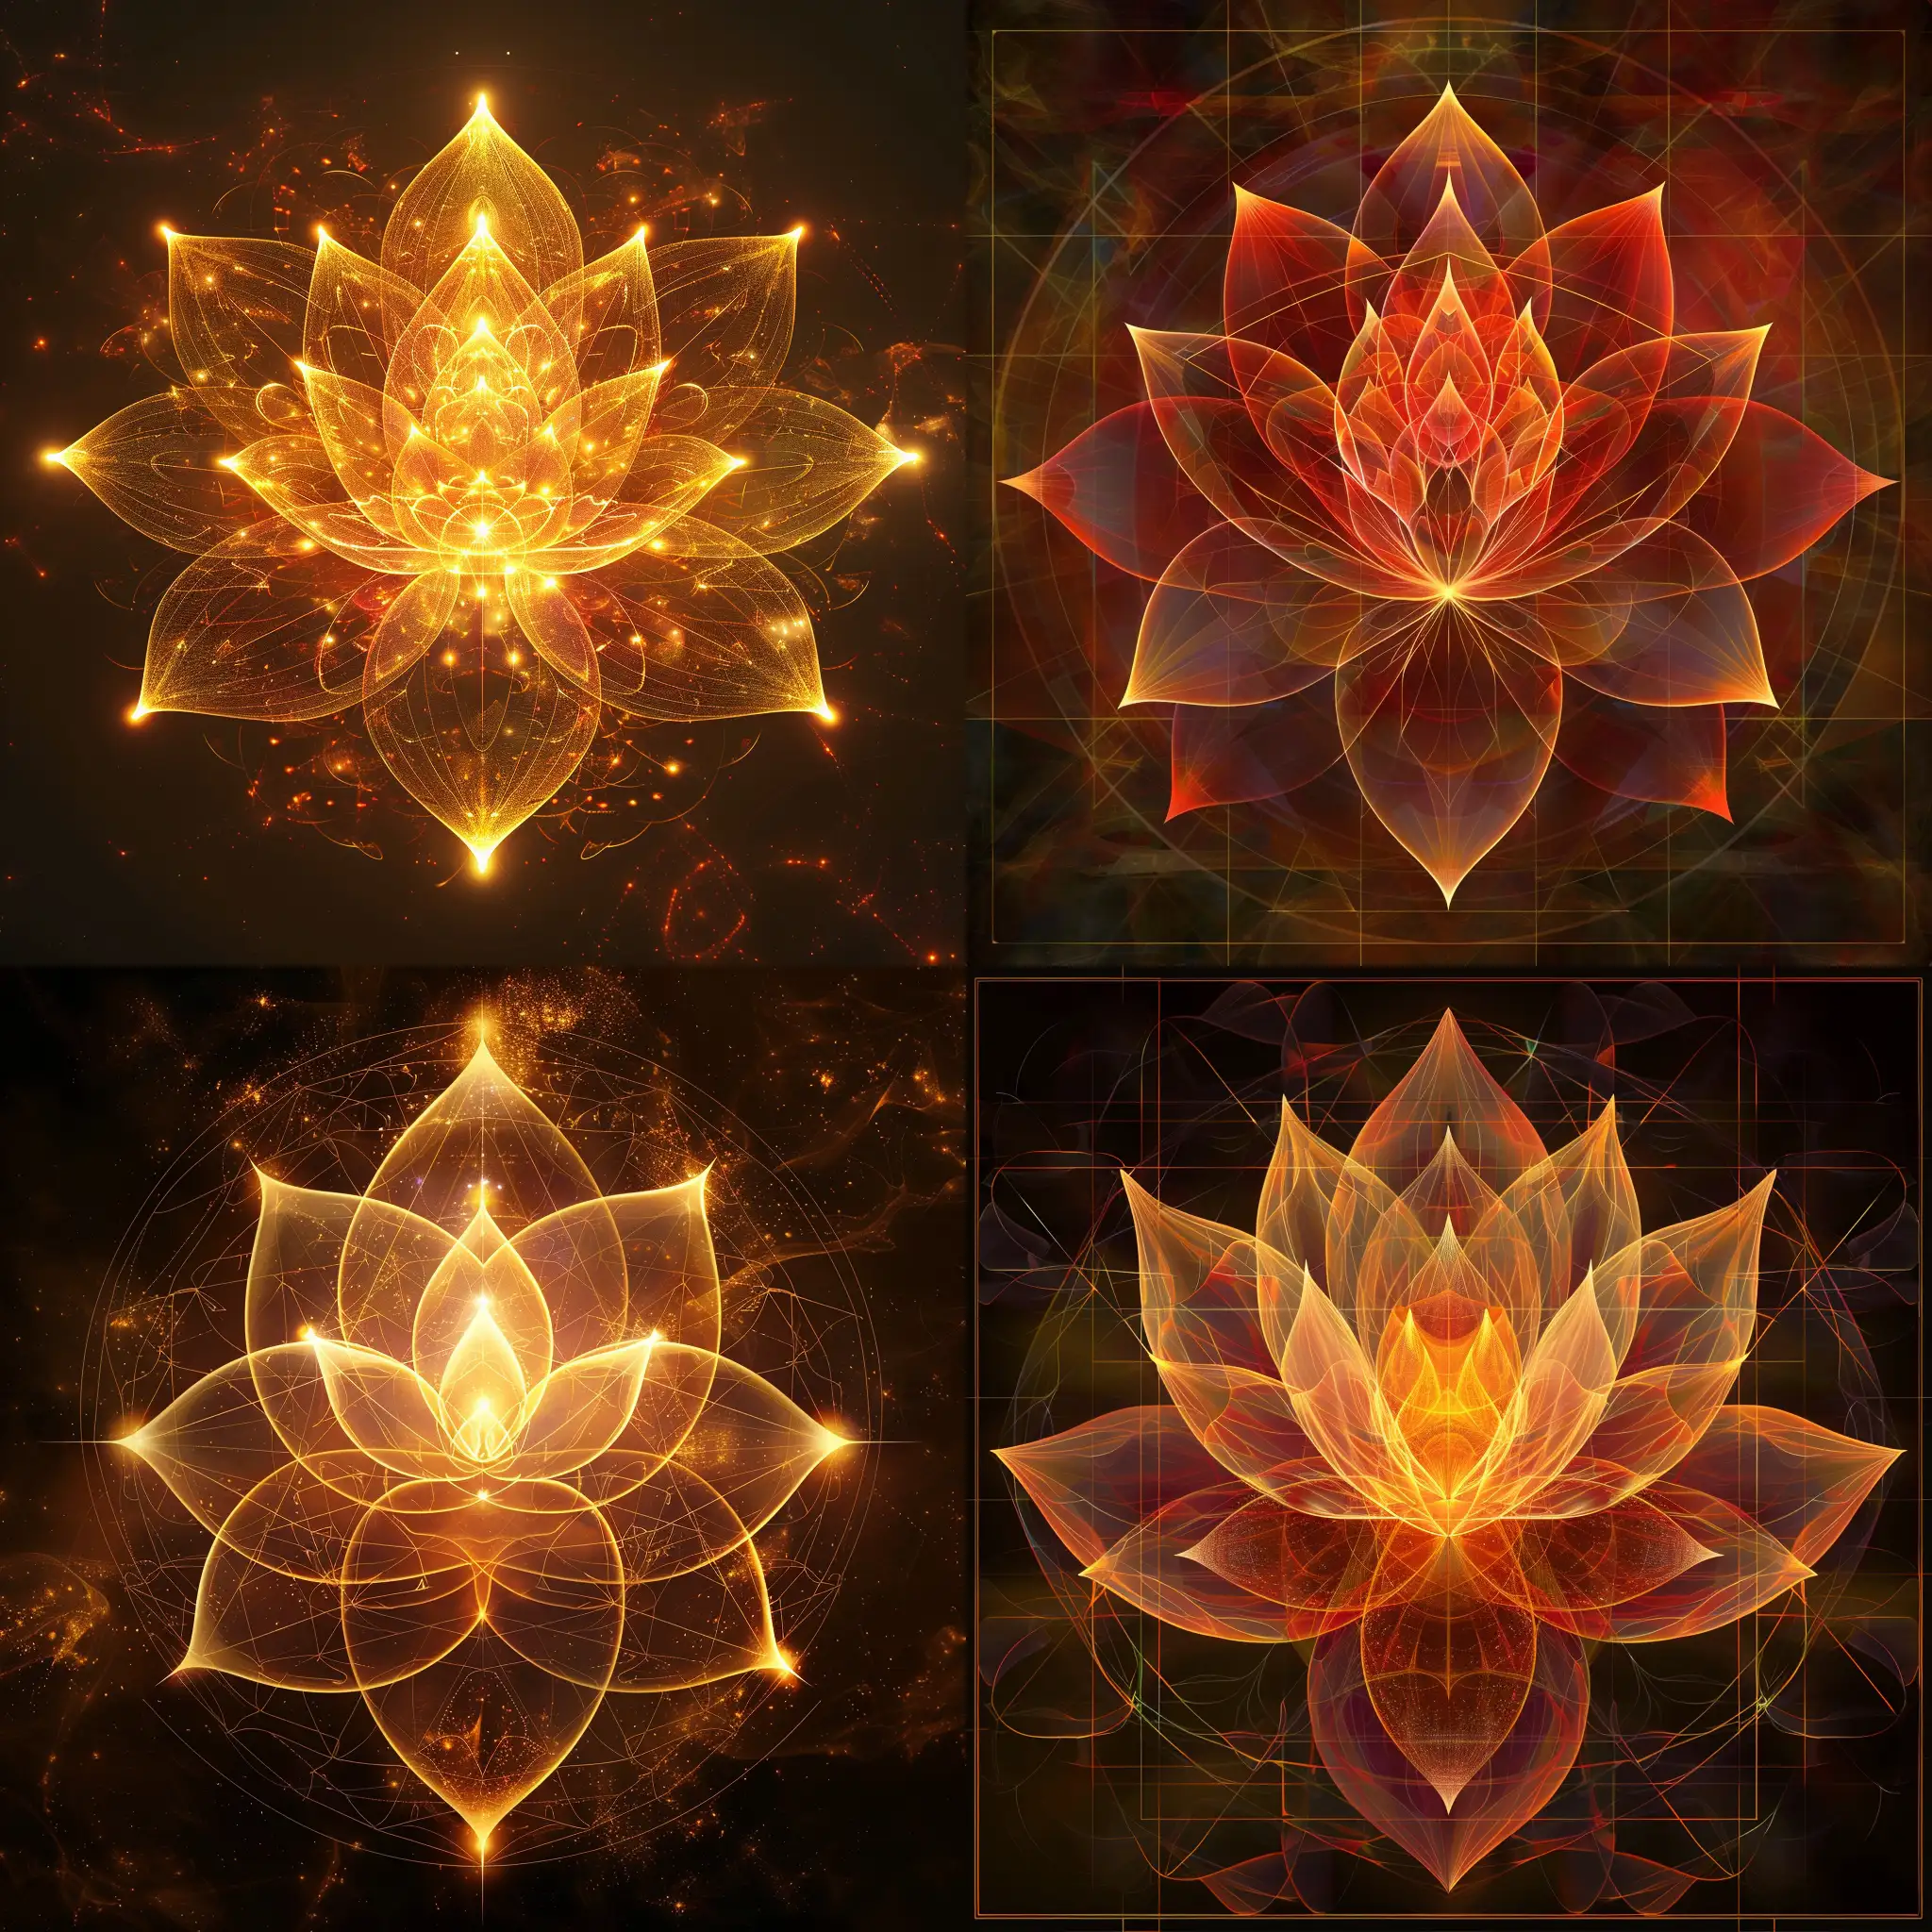 create a rennaisanc lotus image in the form of a golden ratio sacred geometry hologram consisting of the following arrangement 